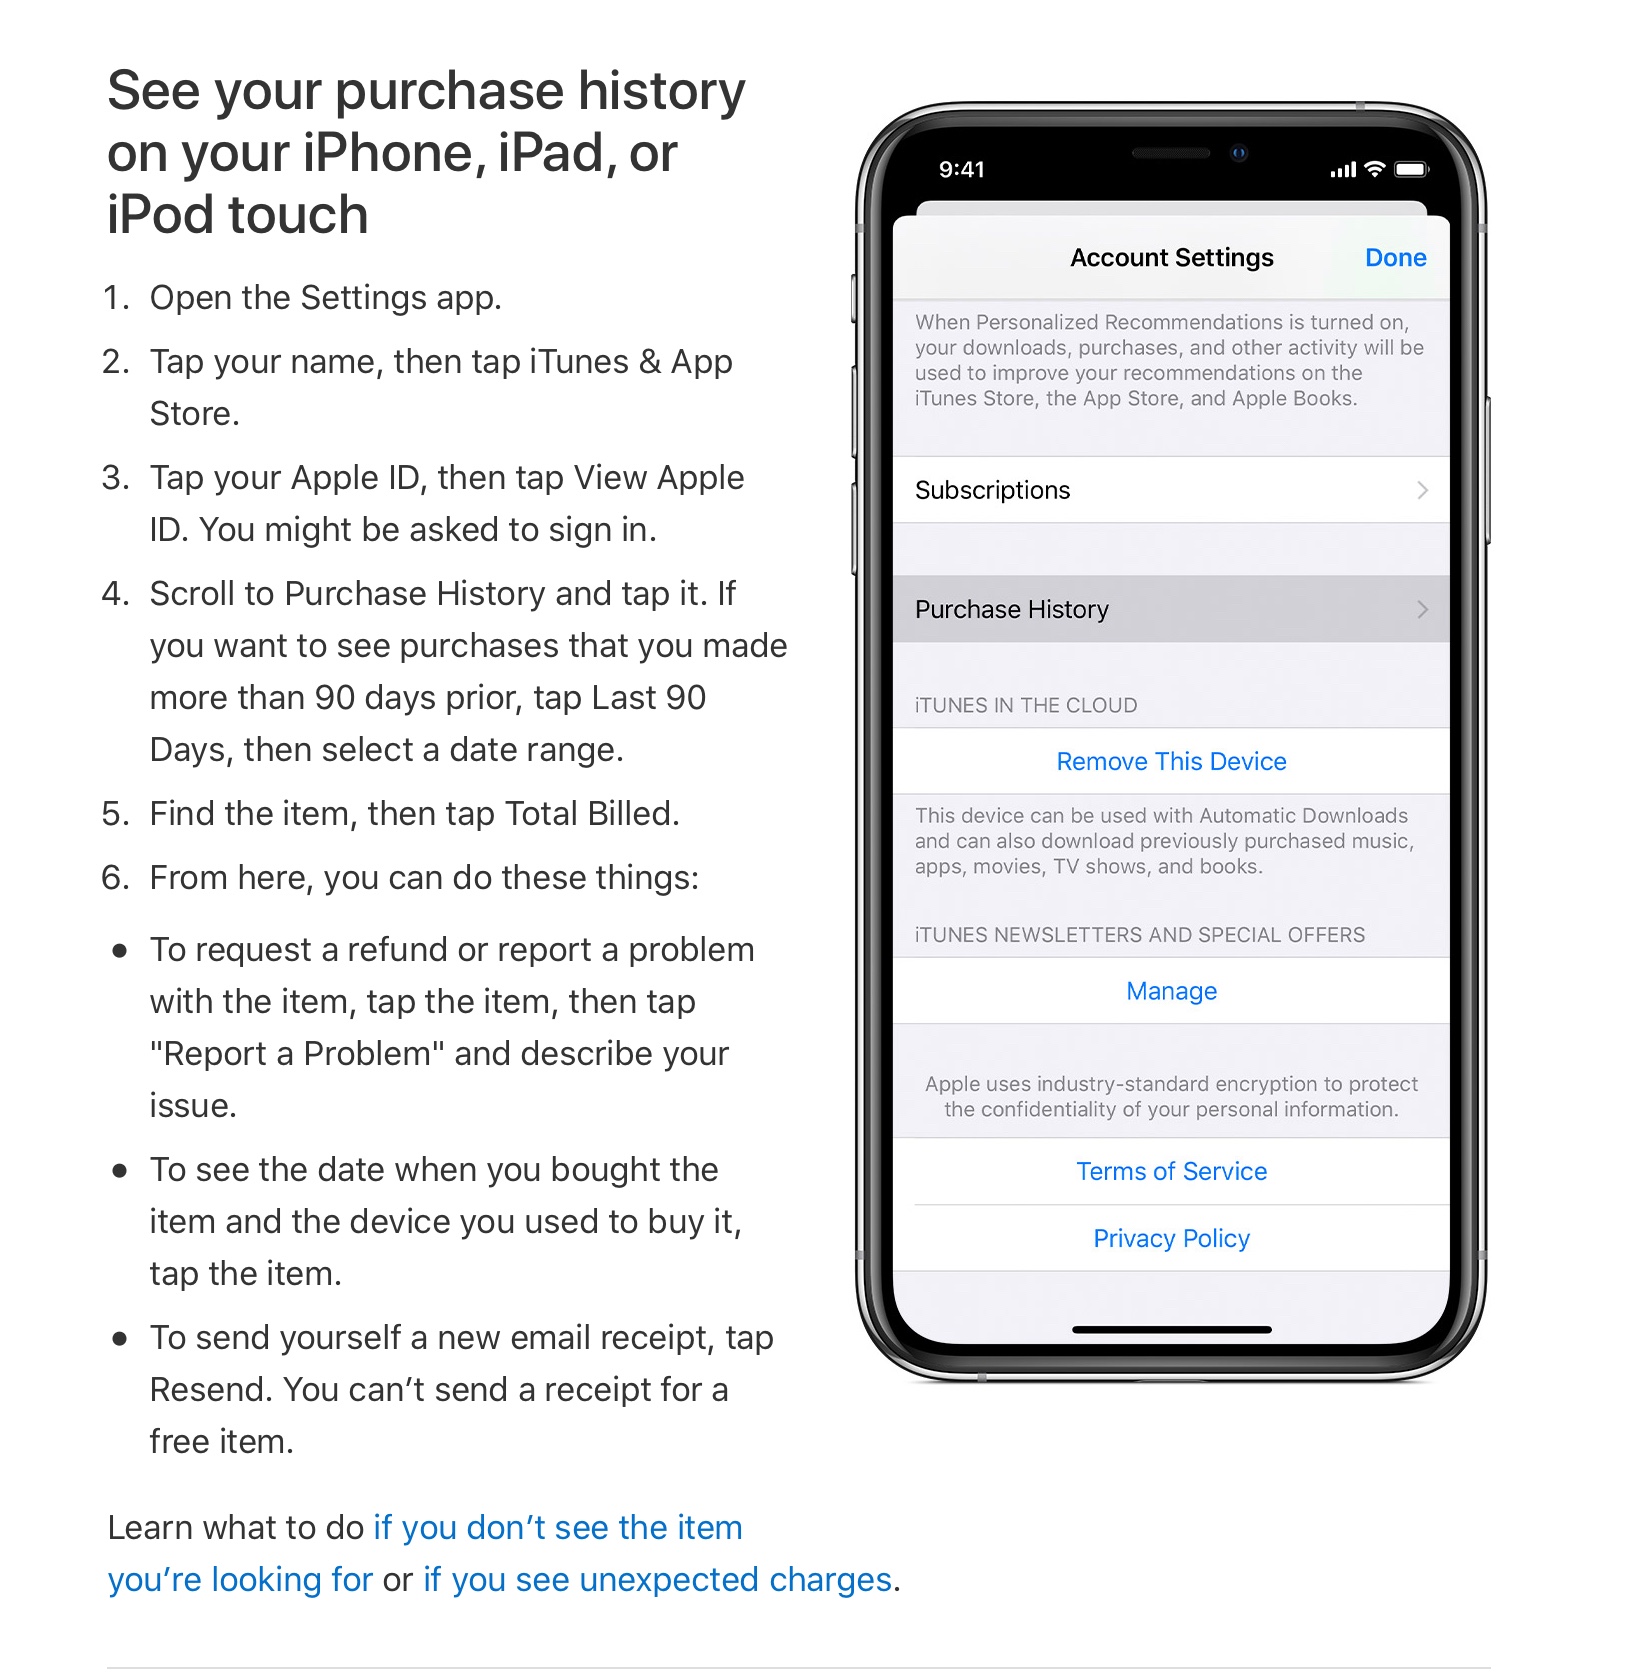 Apple charges me 14.97 when I purchase a … - Apple Community